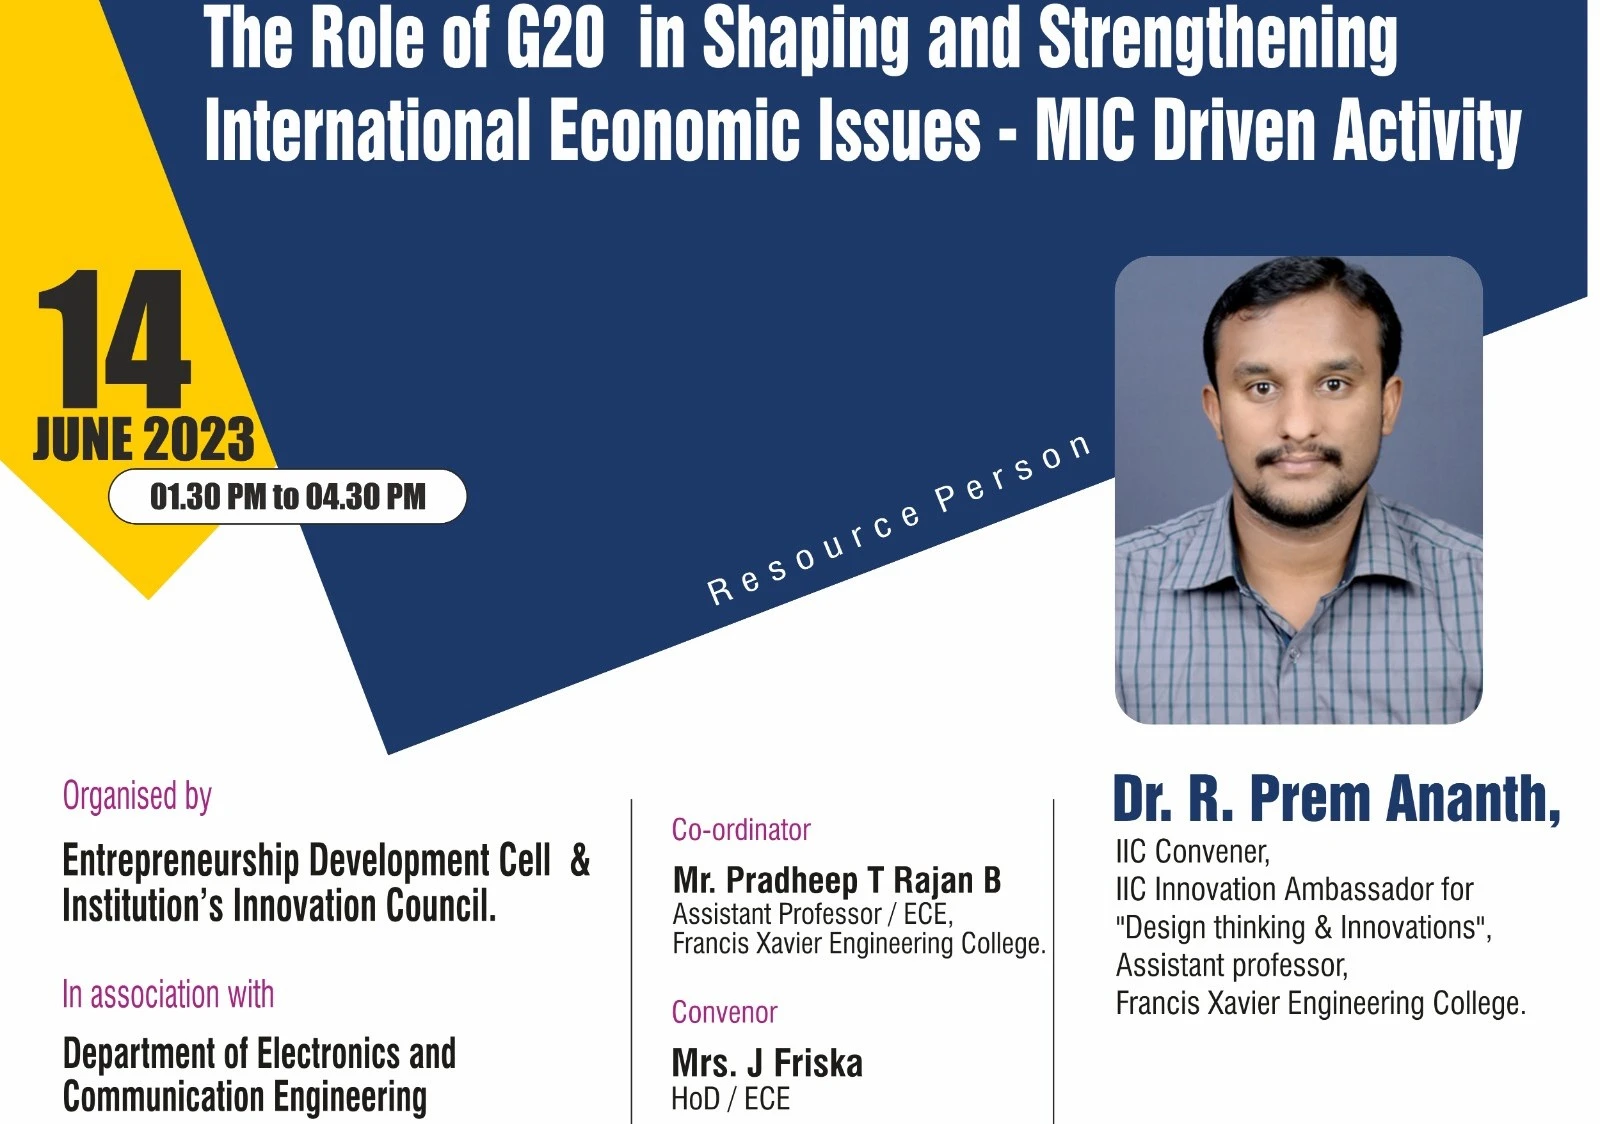 The Role of G20 in Shaping and Strengthening International Economic Issues - MIC Driven Activity